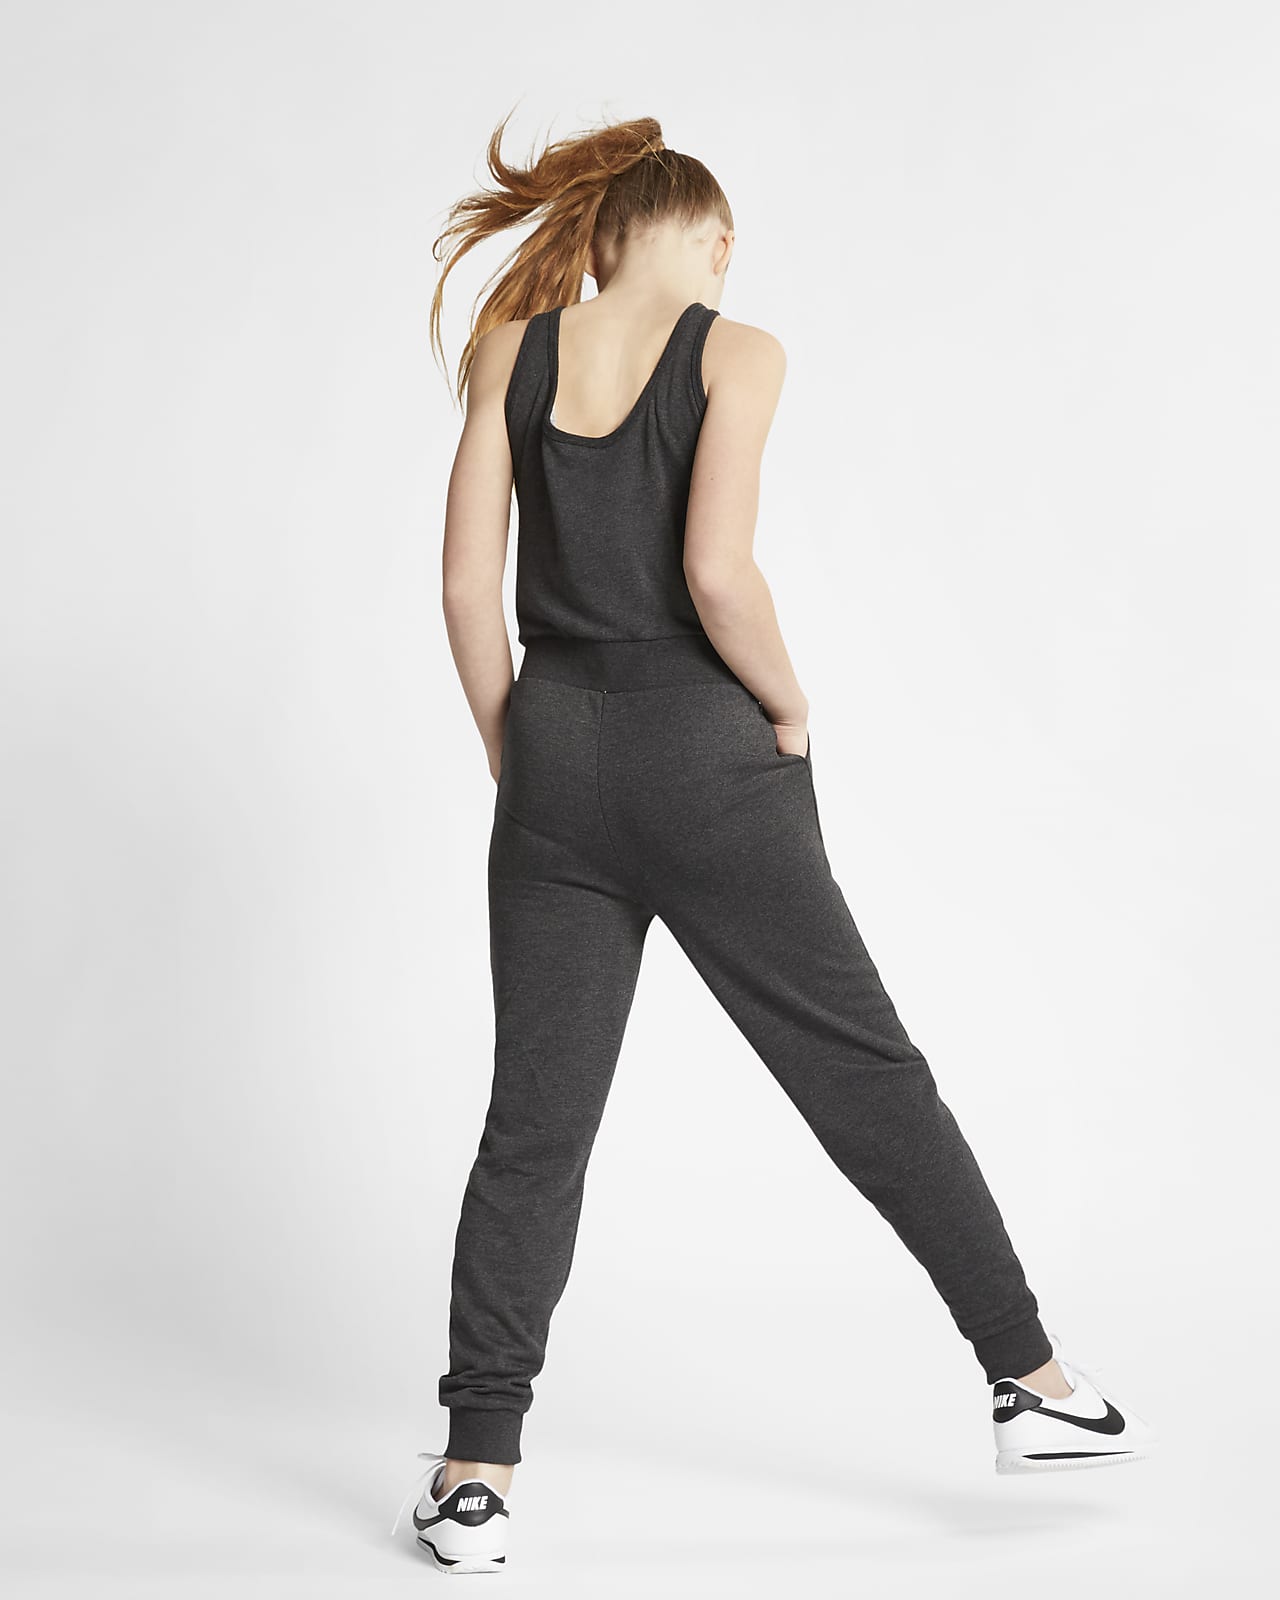 Women's Jumpsuits at Nike - Clothing